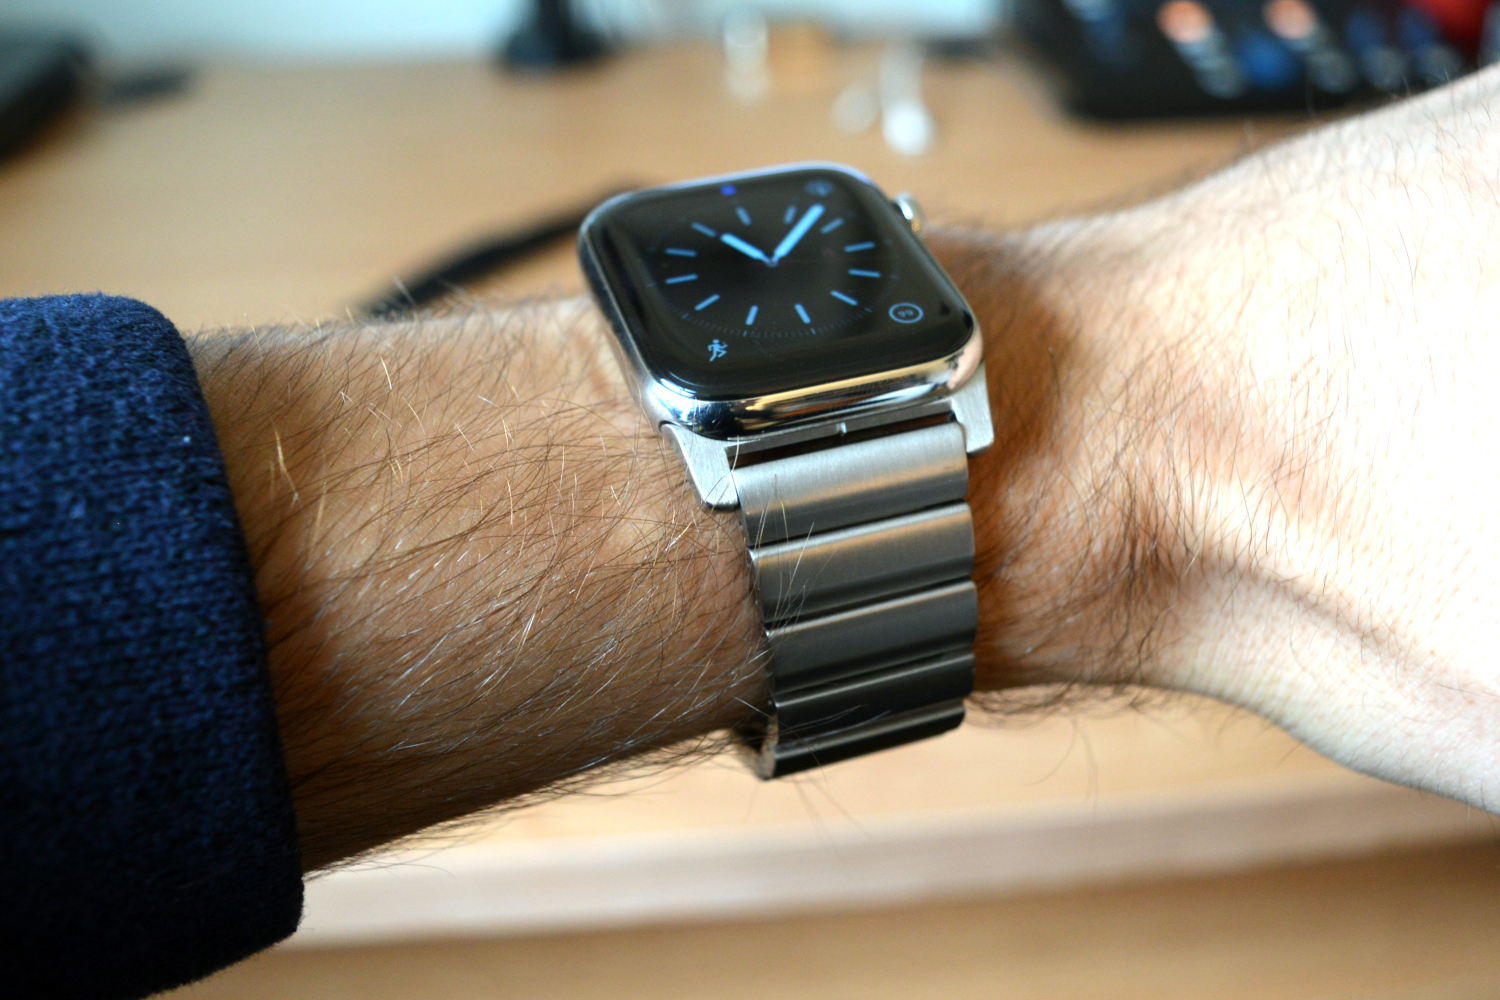 Nomad's Titanium Apple Watch Straps Are Classy But Expensive